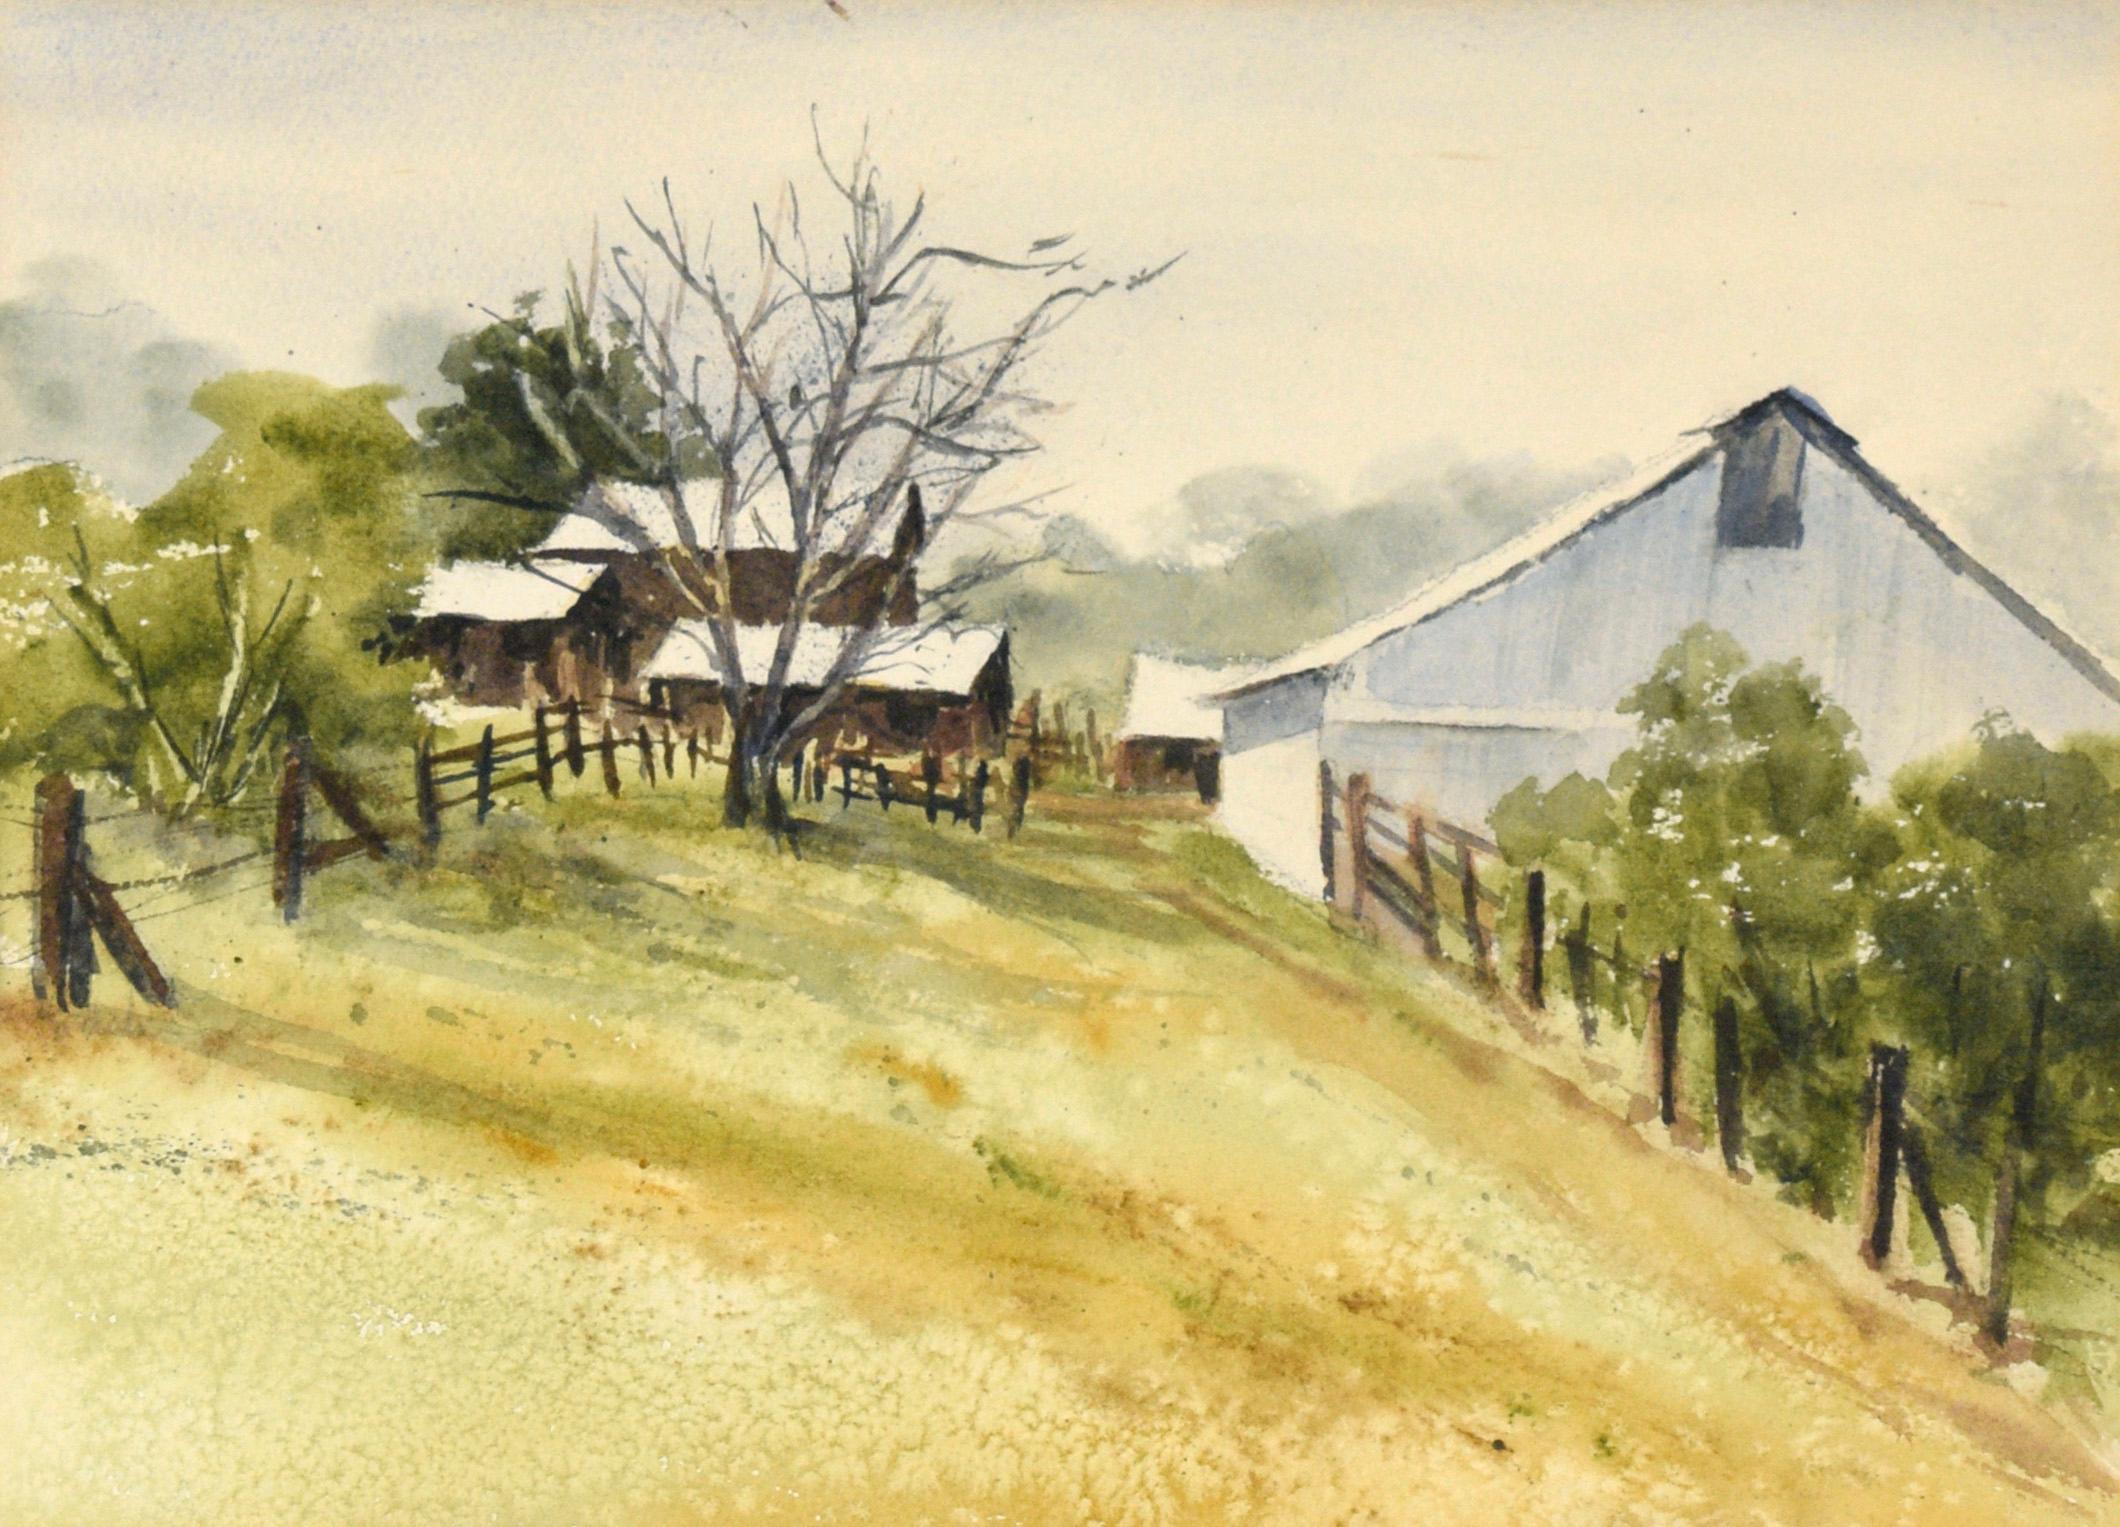 Grey Barn and Brown House - Rural California Landscape in Watercolor on Paper - Art by Alice Duke